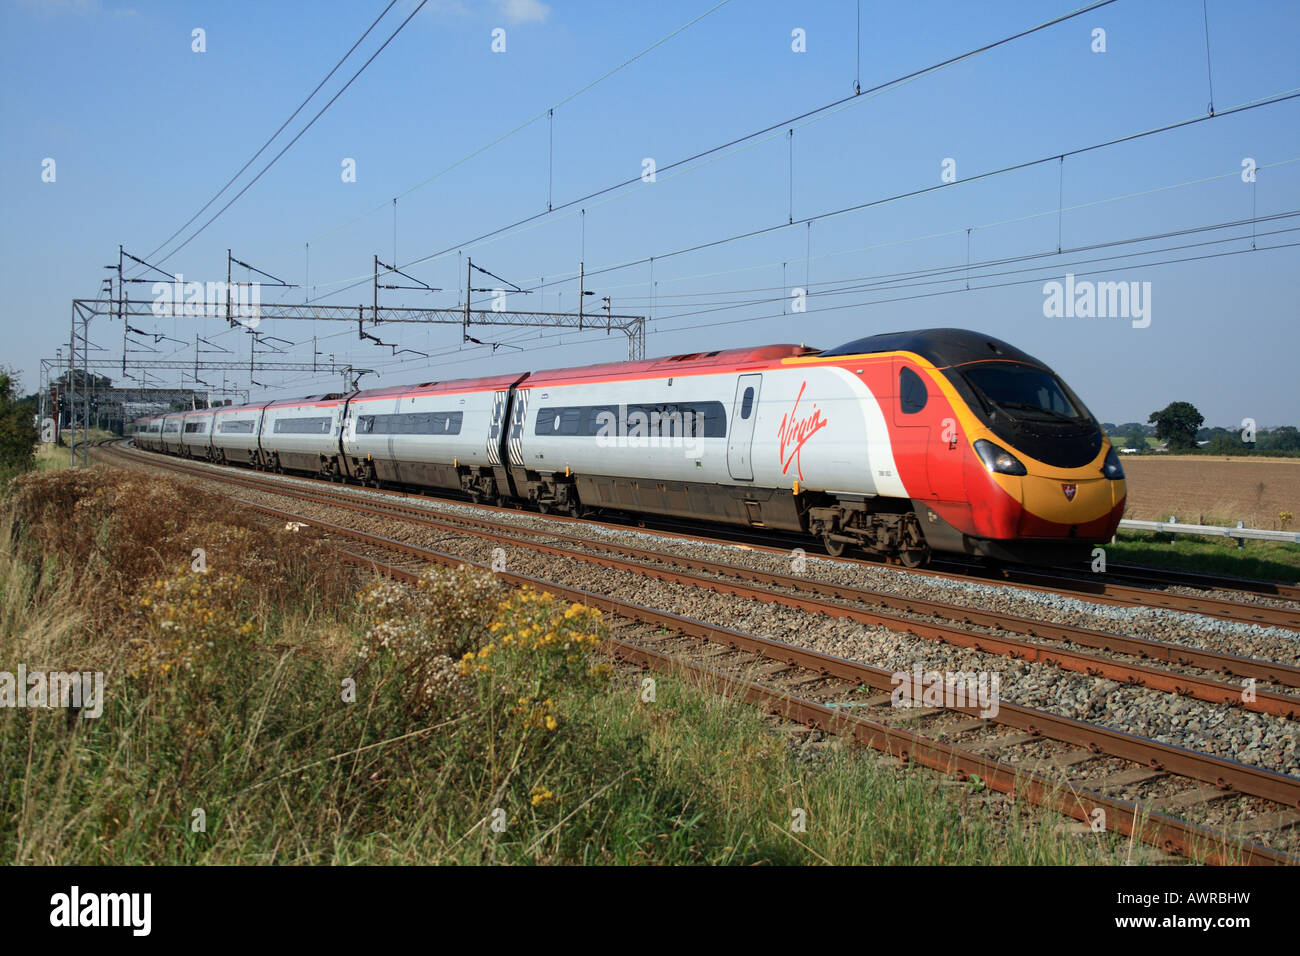 Virgin Trains class 390 Pendolino express train on London bound service on the West Coast Mainline Trent Valley in Warwickshire. Stock Photo